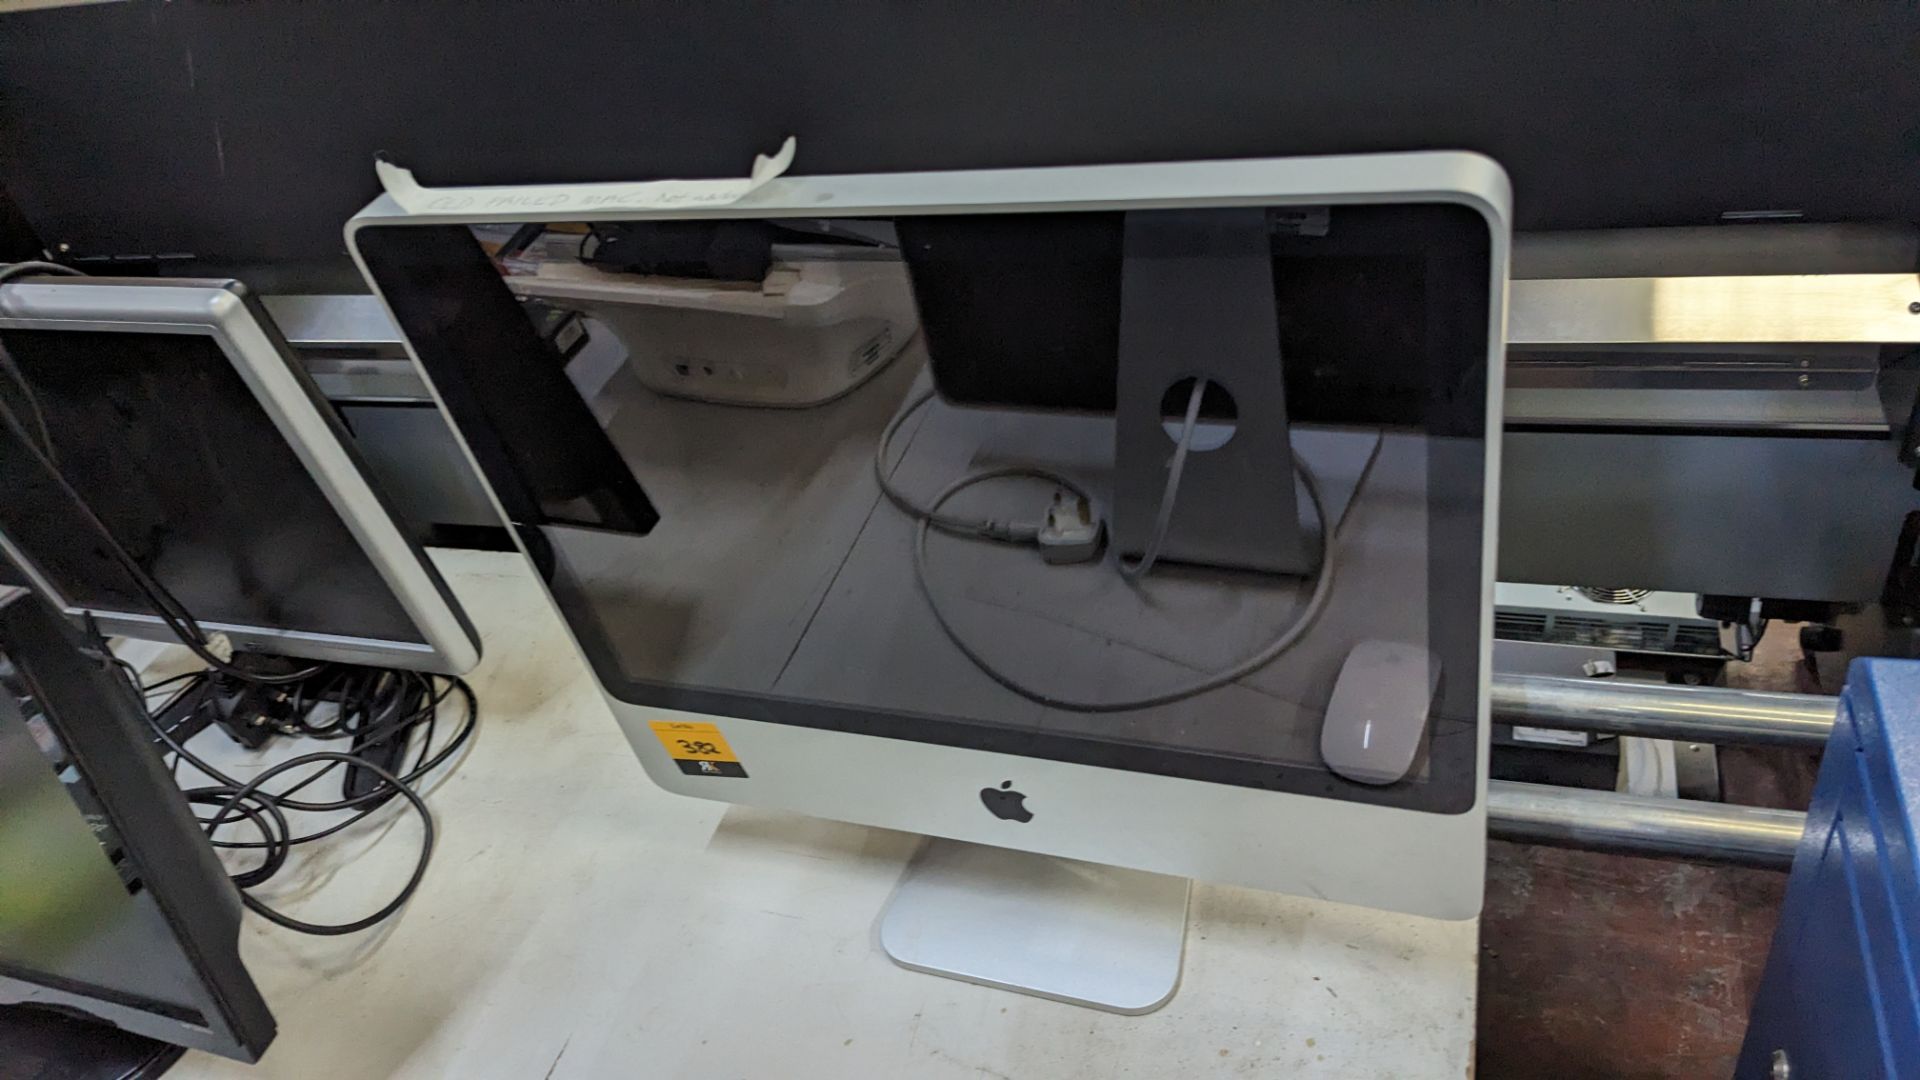 Apple iMac computer model A1224 EMC 2210 including mouse but no keyboard. NB not working - Image 6 of 7